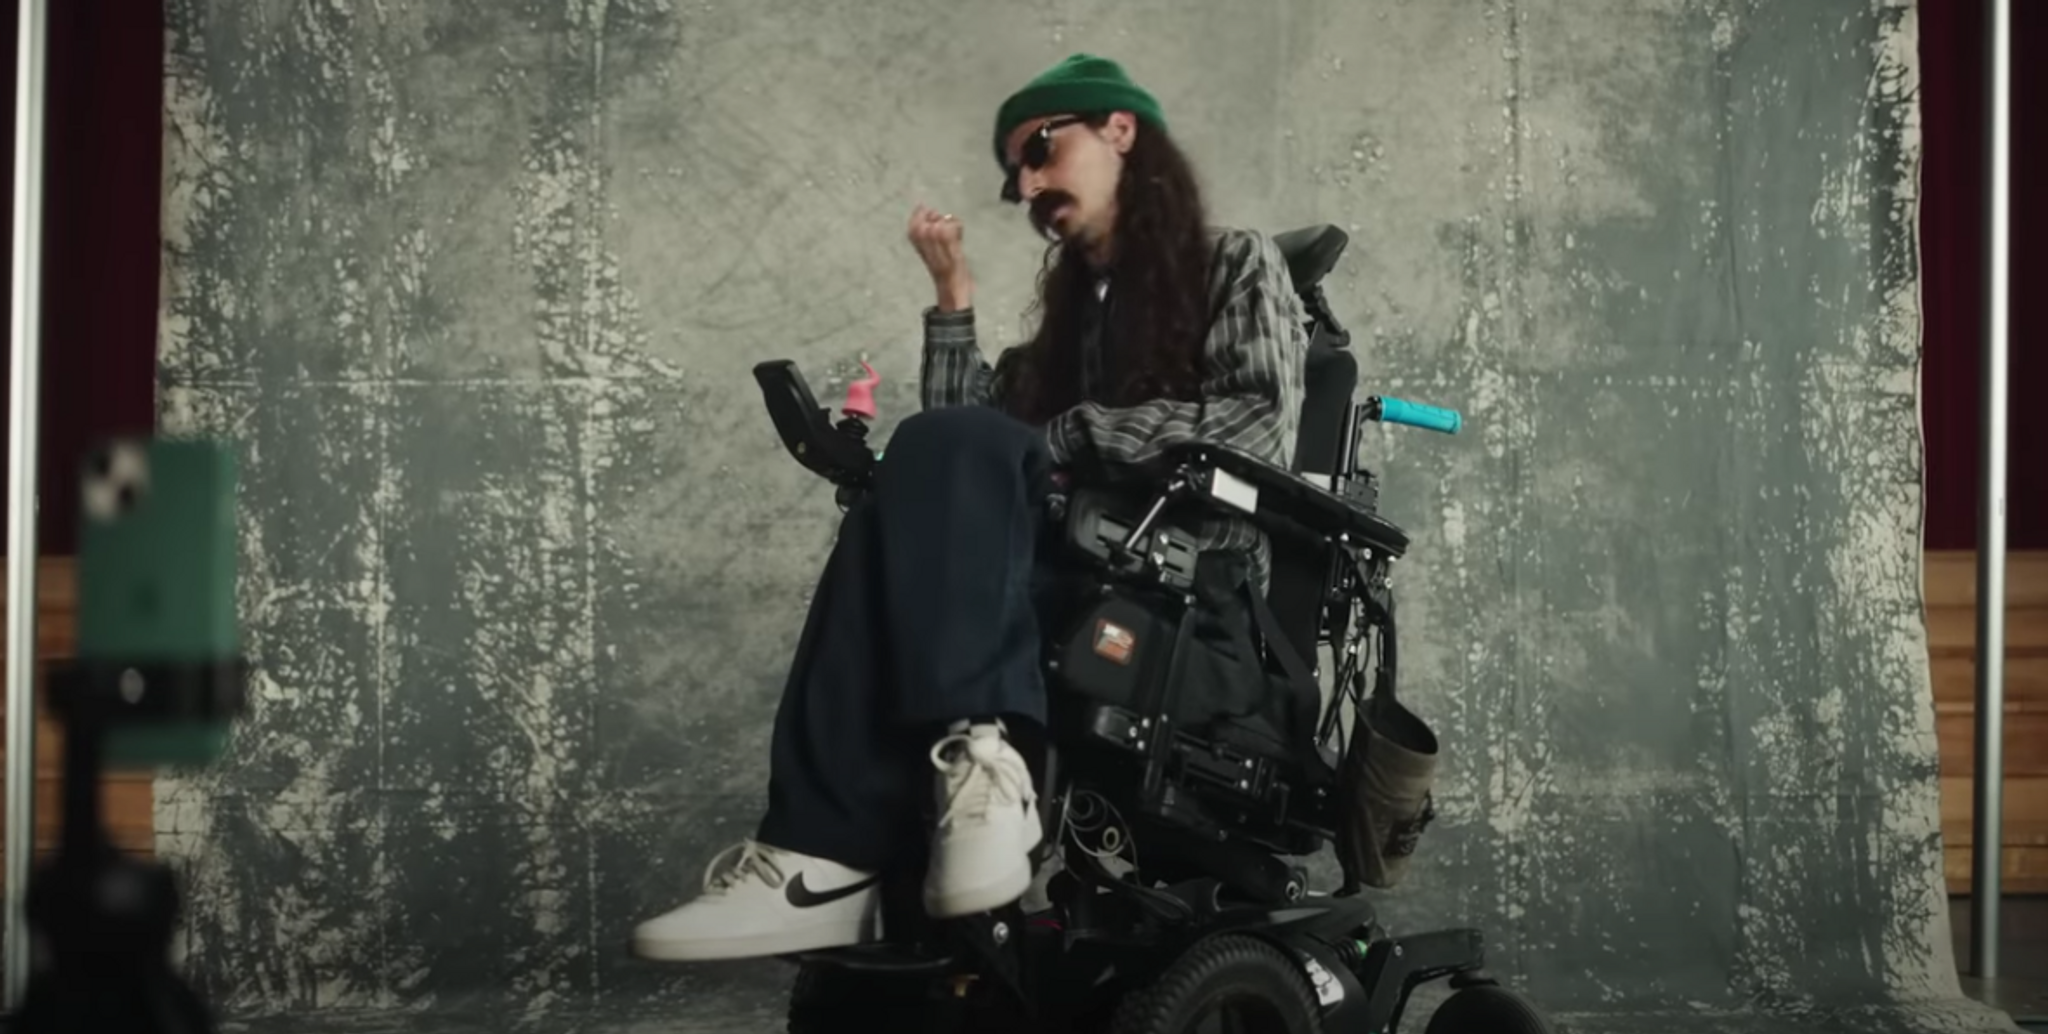 Apple celebrates accessibility features in inclusive ad